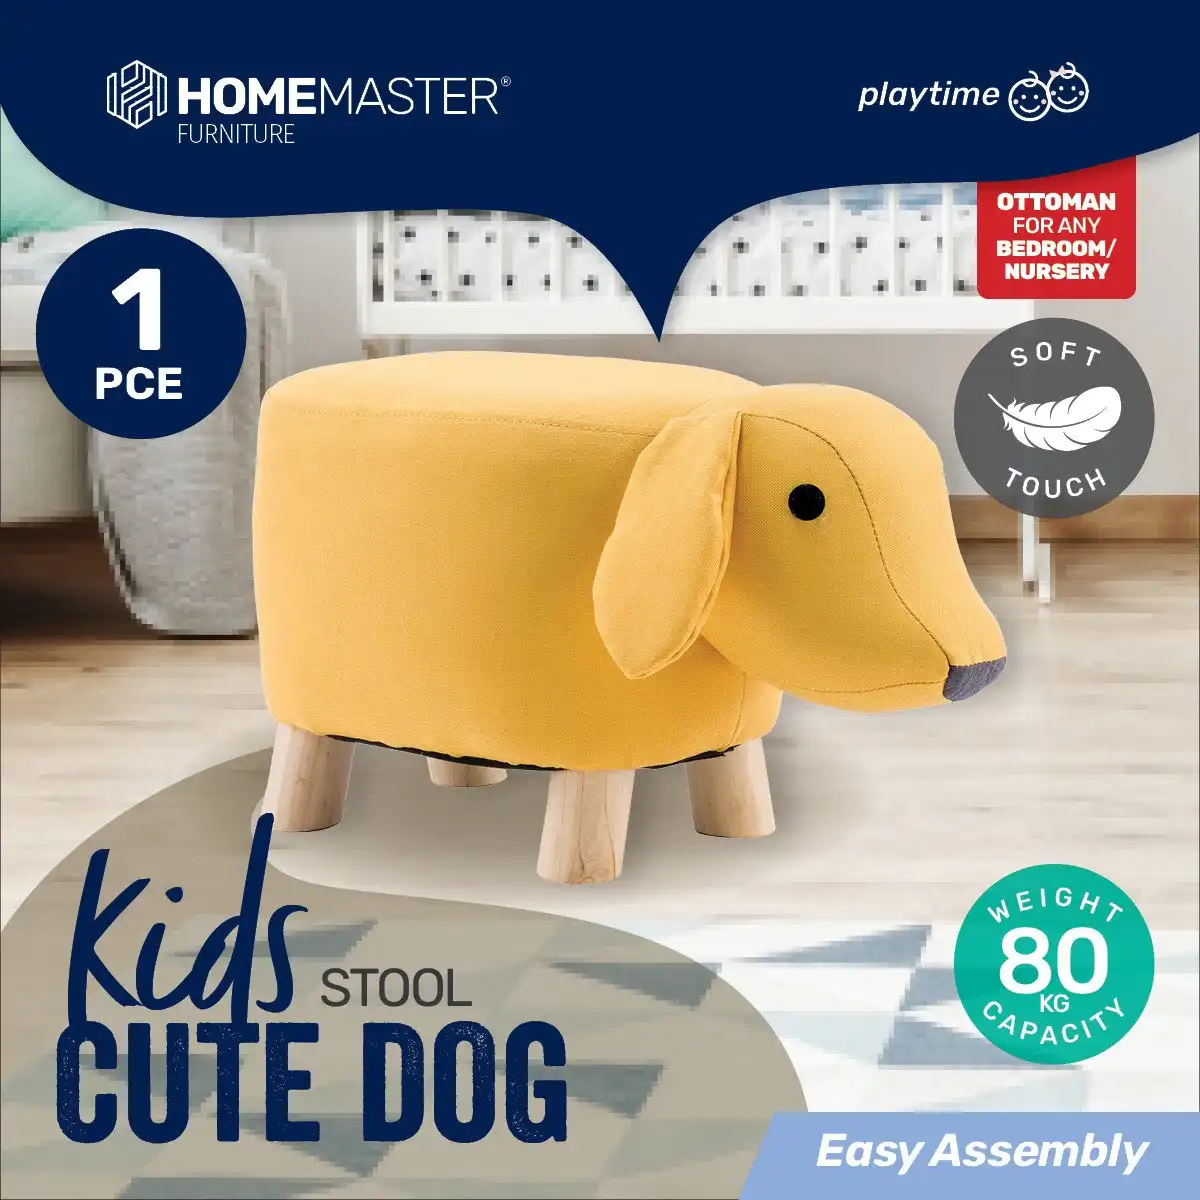 Home Master® Kids Animal Stool Cute Dog Character Premium Quality & Style